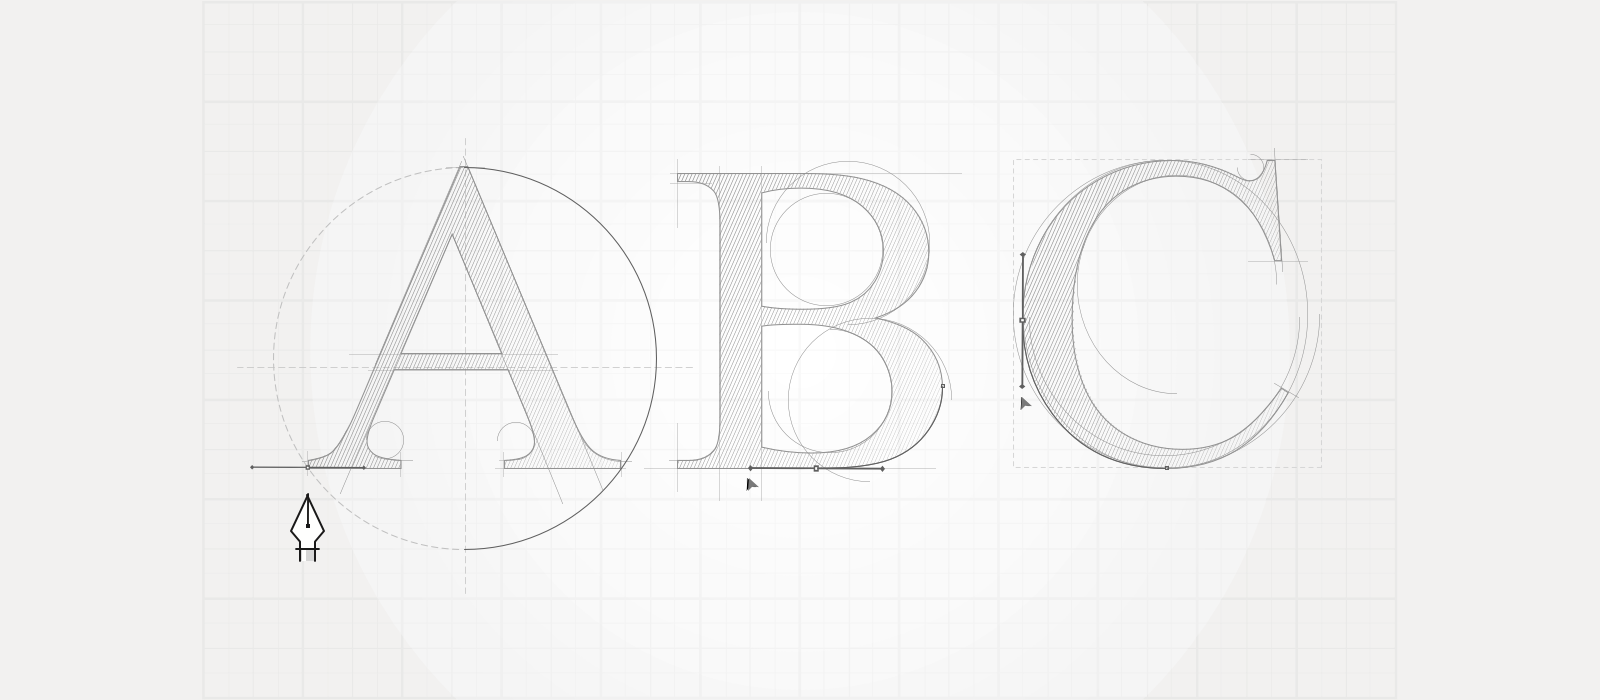 How to combine typefaces successfully to add personality to your digital interfaces